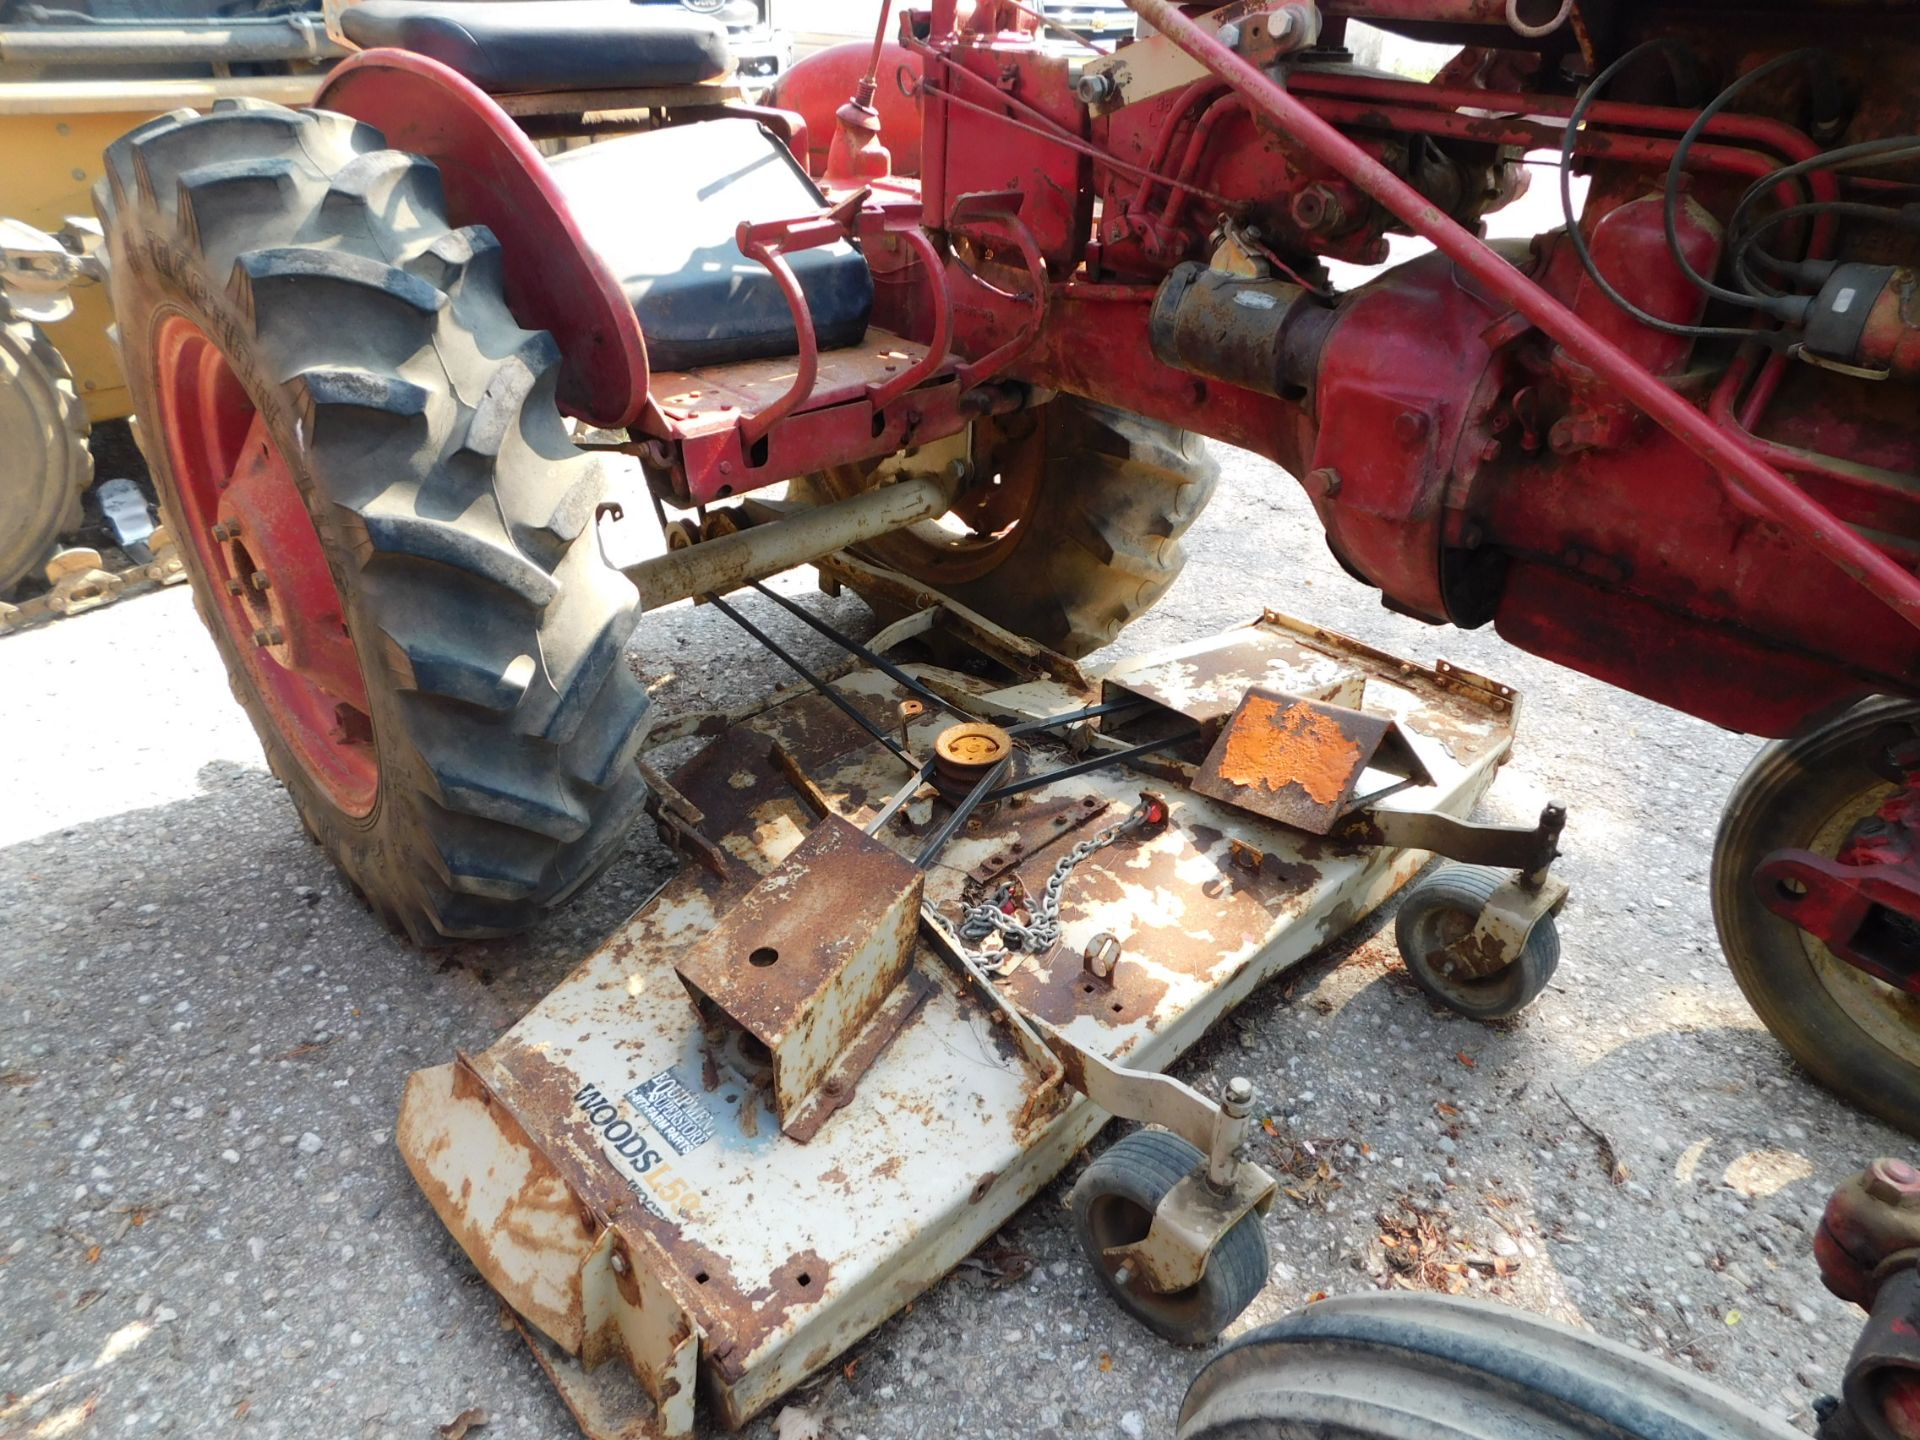 1957 Farmall Model 130 Tractor with Woods 72" Belly Mower - Image 13 of 22